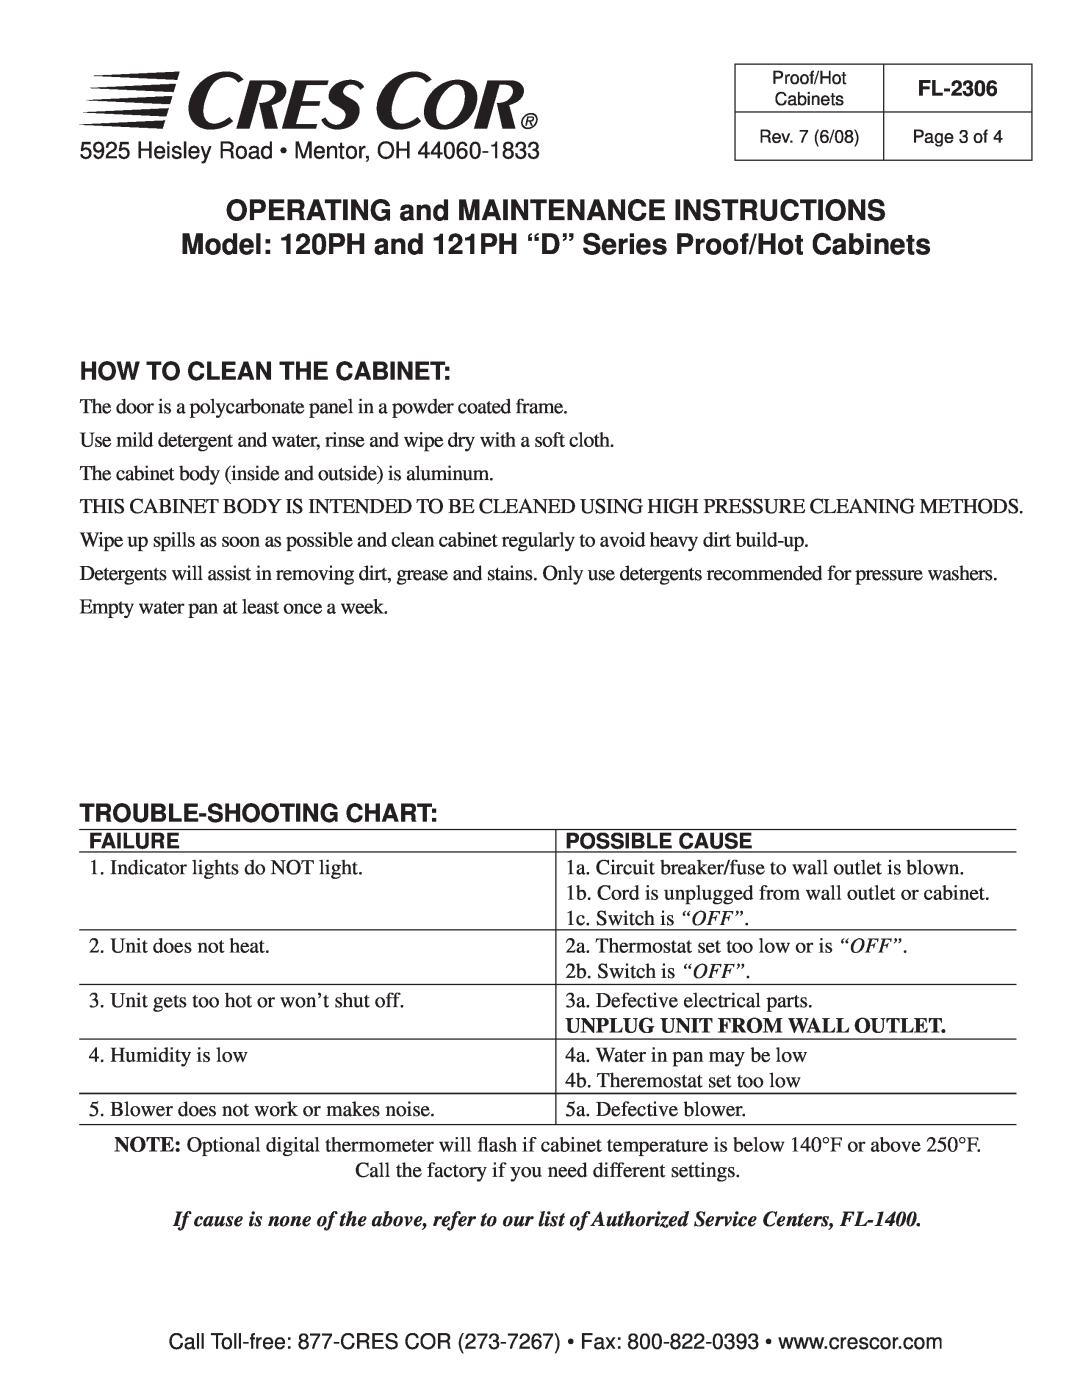 Cres Cor Proof/Hot Cabinets, 121PH Trouble-Shooting Chart, Failure, Possible Cause, OPERATING and MAINTENANCE INSTRUCTIONS 